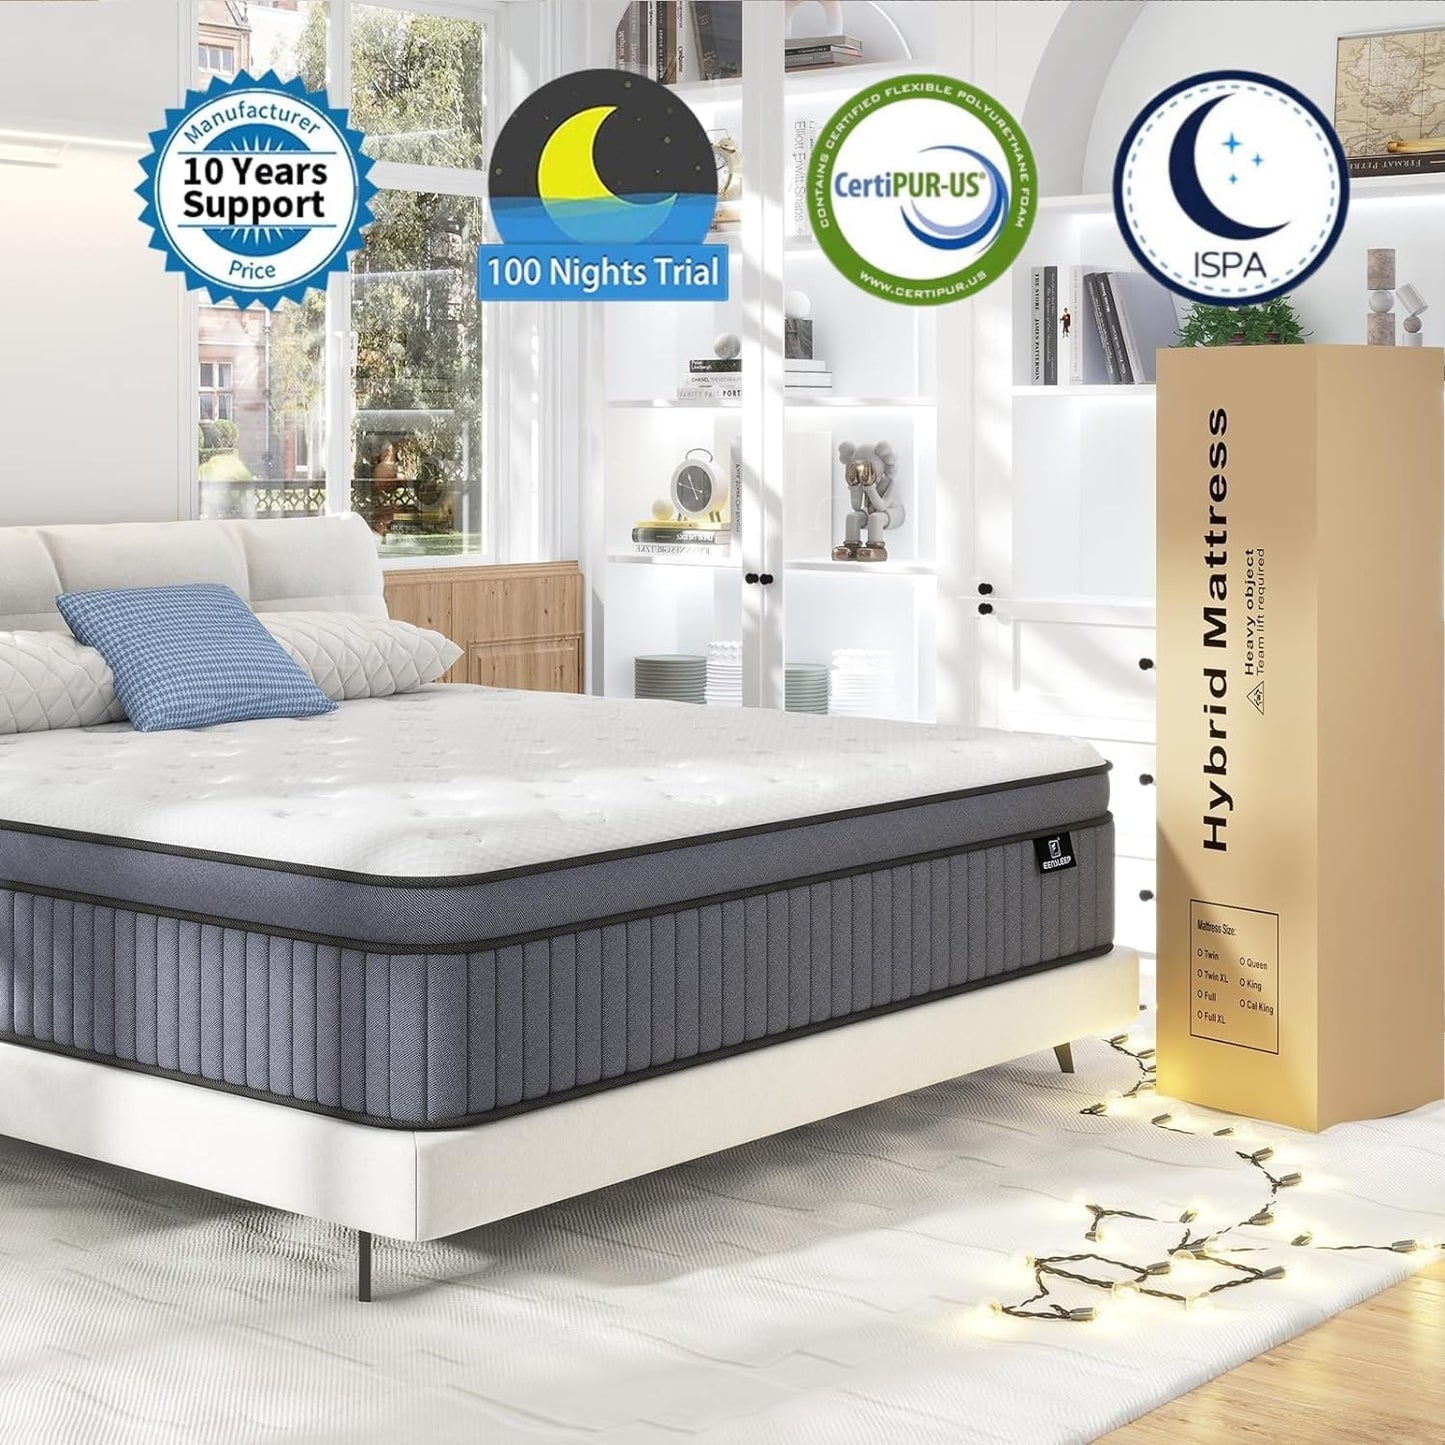 EEN EEN SLEEP King Size Mattress - Upgrade Strengthen - 12 Inch Hybrid King Mattress in a Box, Mattress King Size with High density Memory Foam and Independent Pocket Springs, Strong Edge Support,Firm